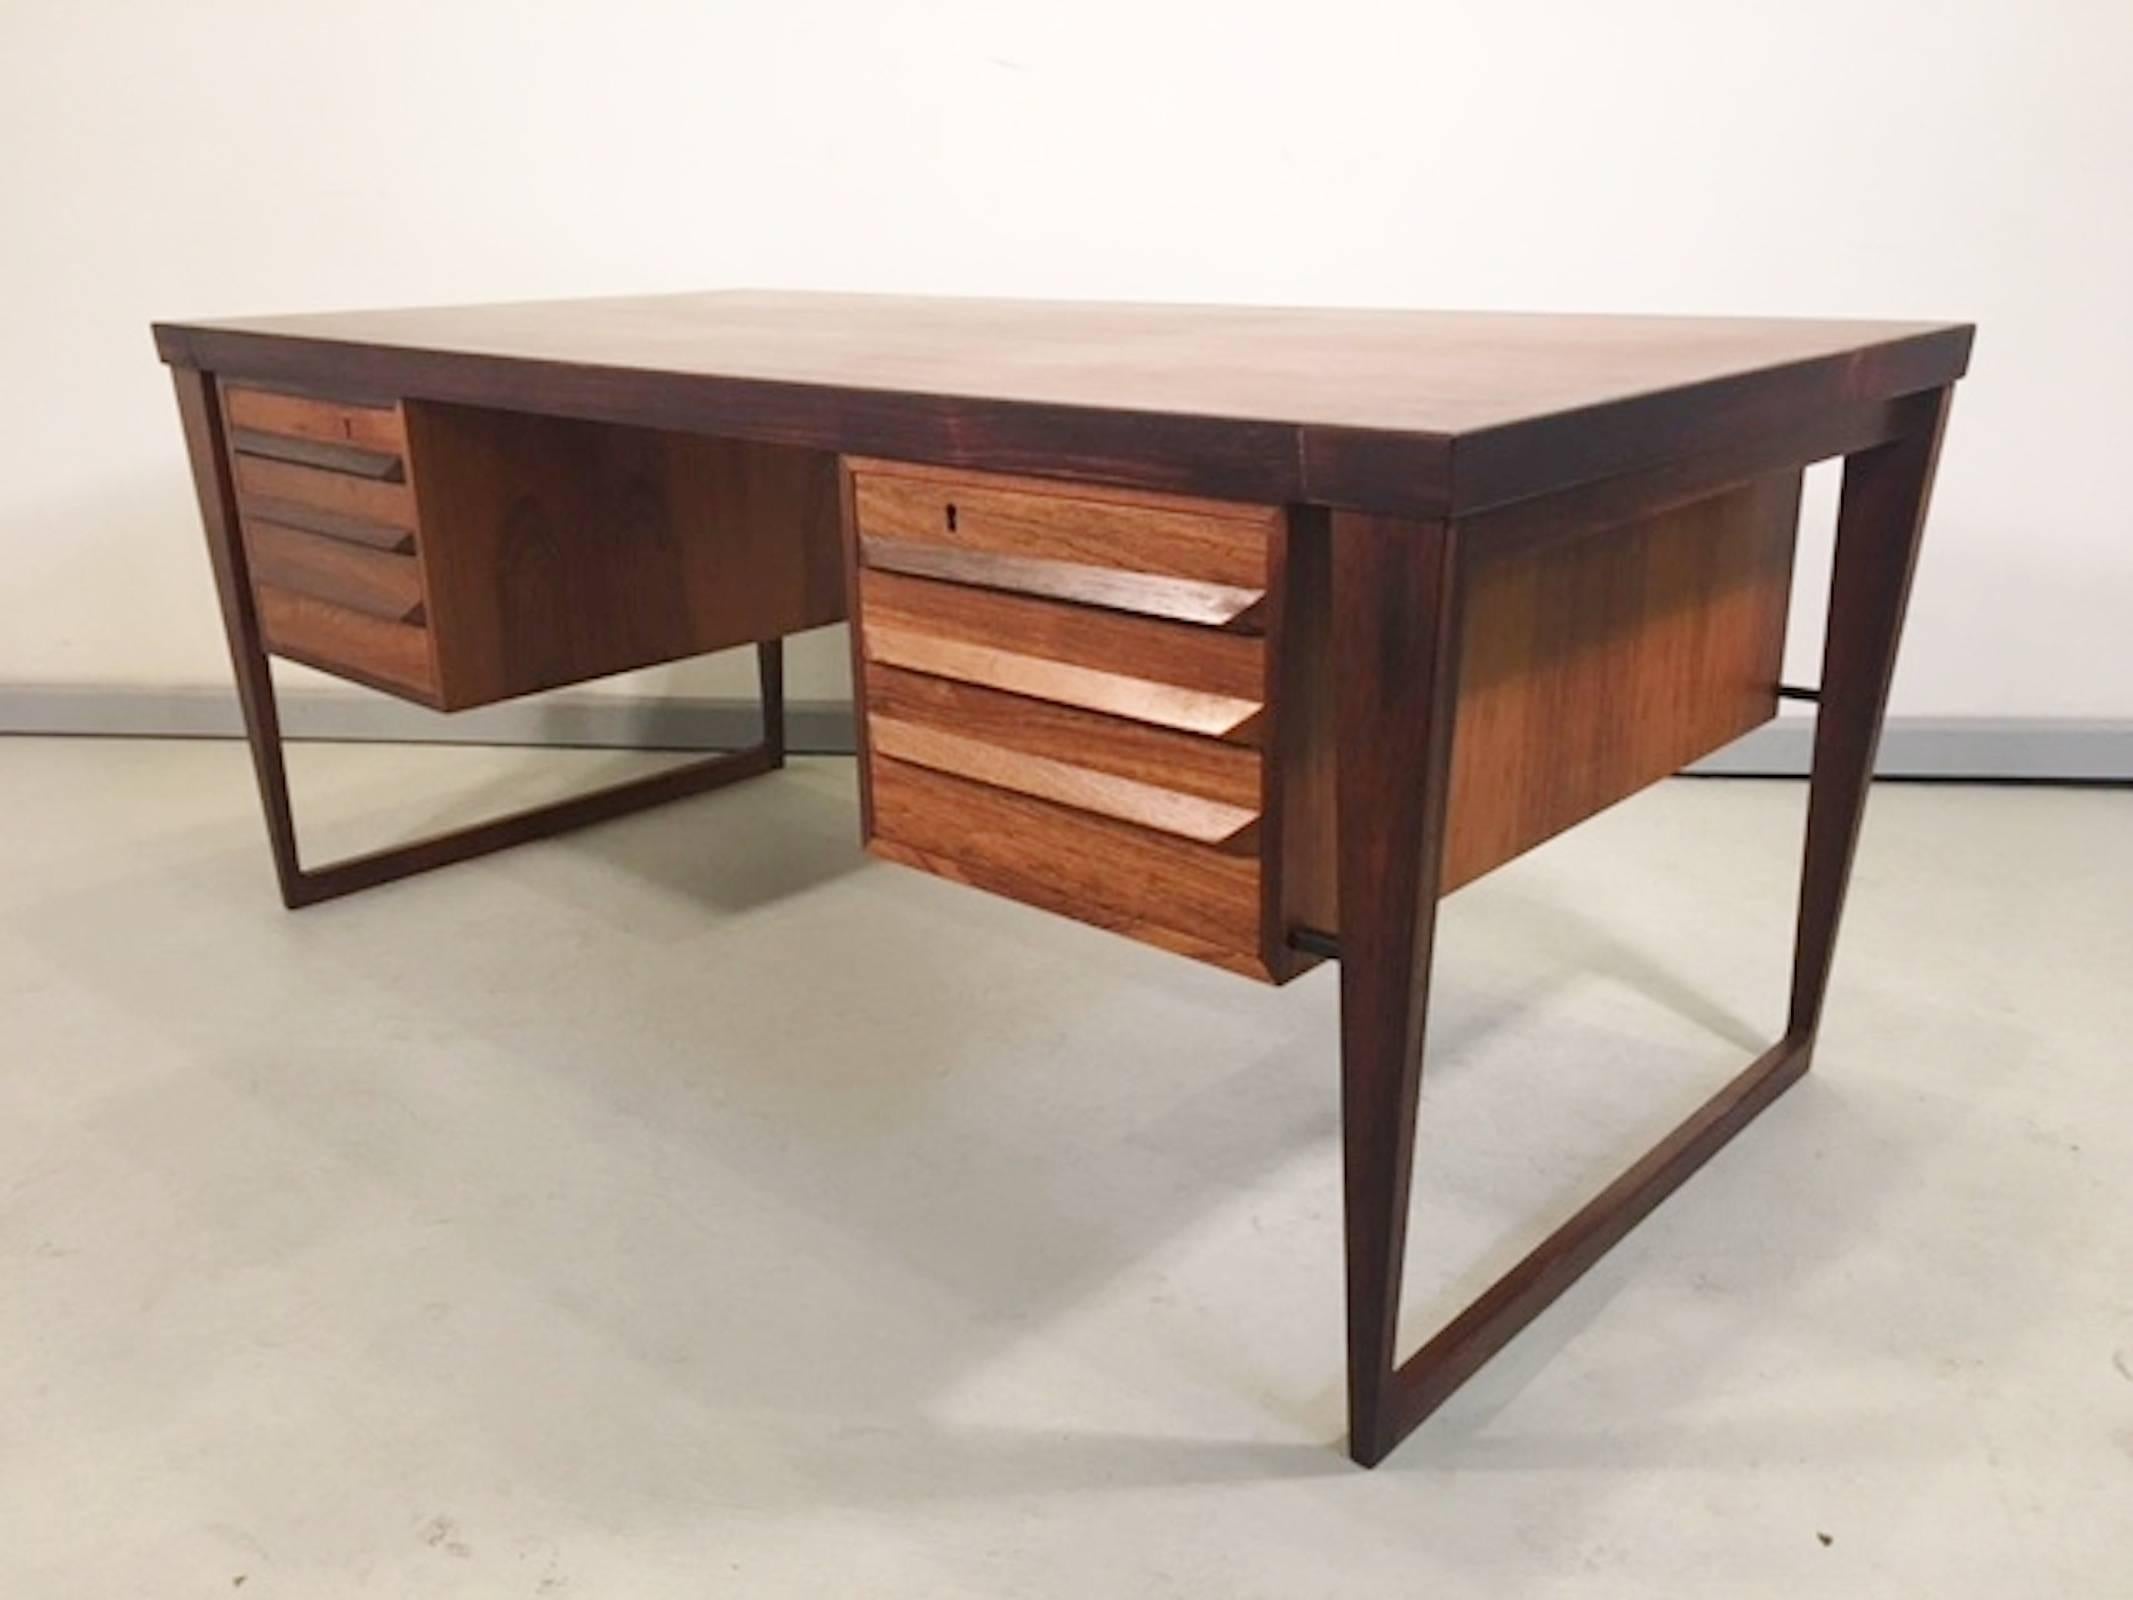 Stunning executive desk designed by Kai Kristiansen, with rich rosewood grain throughout. Six drawers with sculpted handles, wide sled legs and a finished back.

(Please confirm item location with dealer).
               